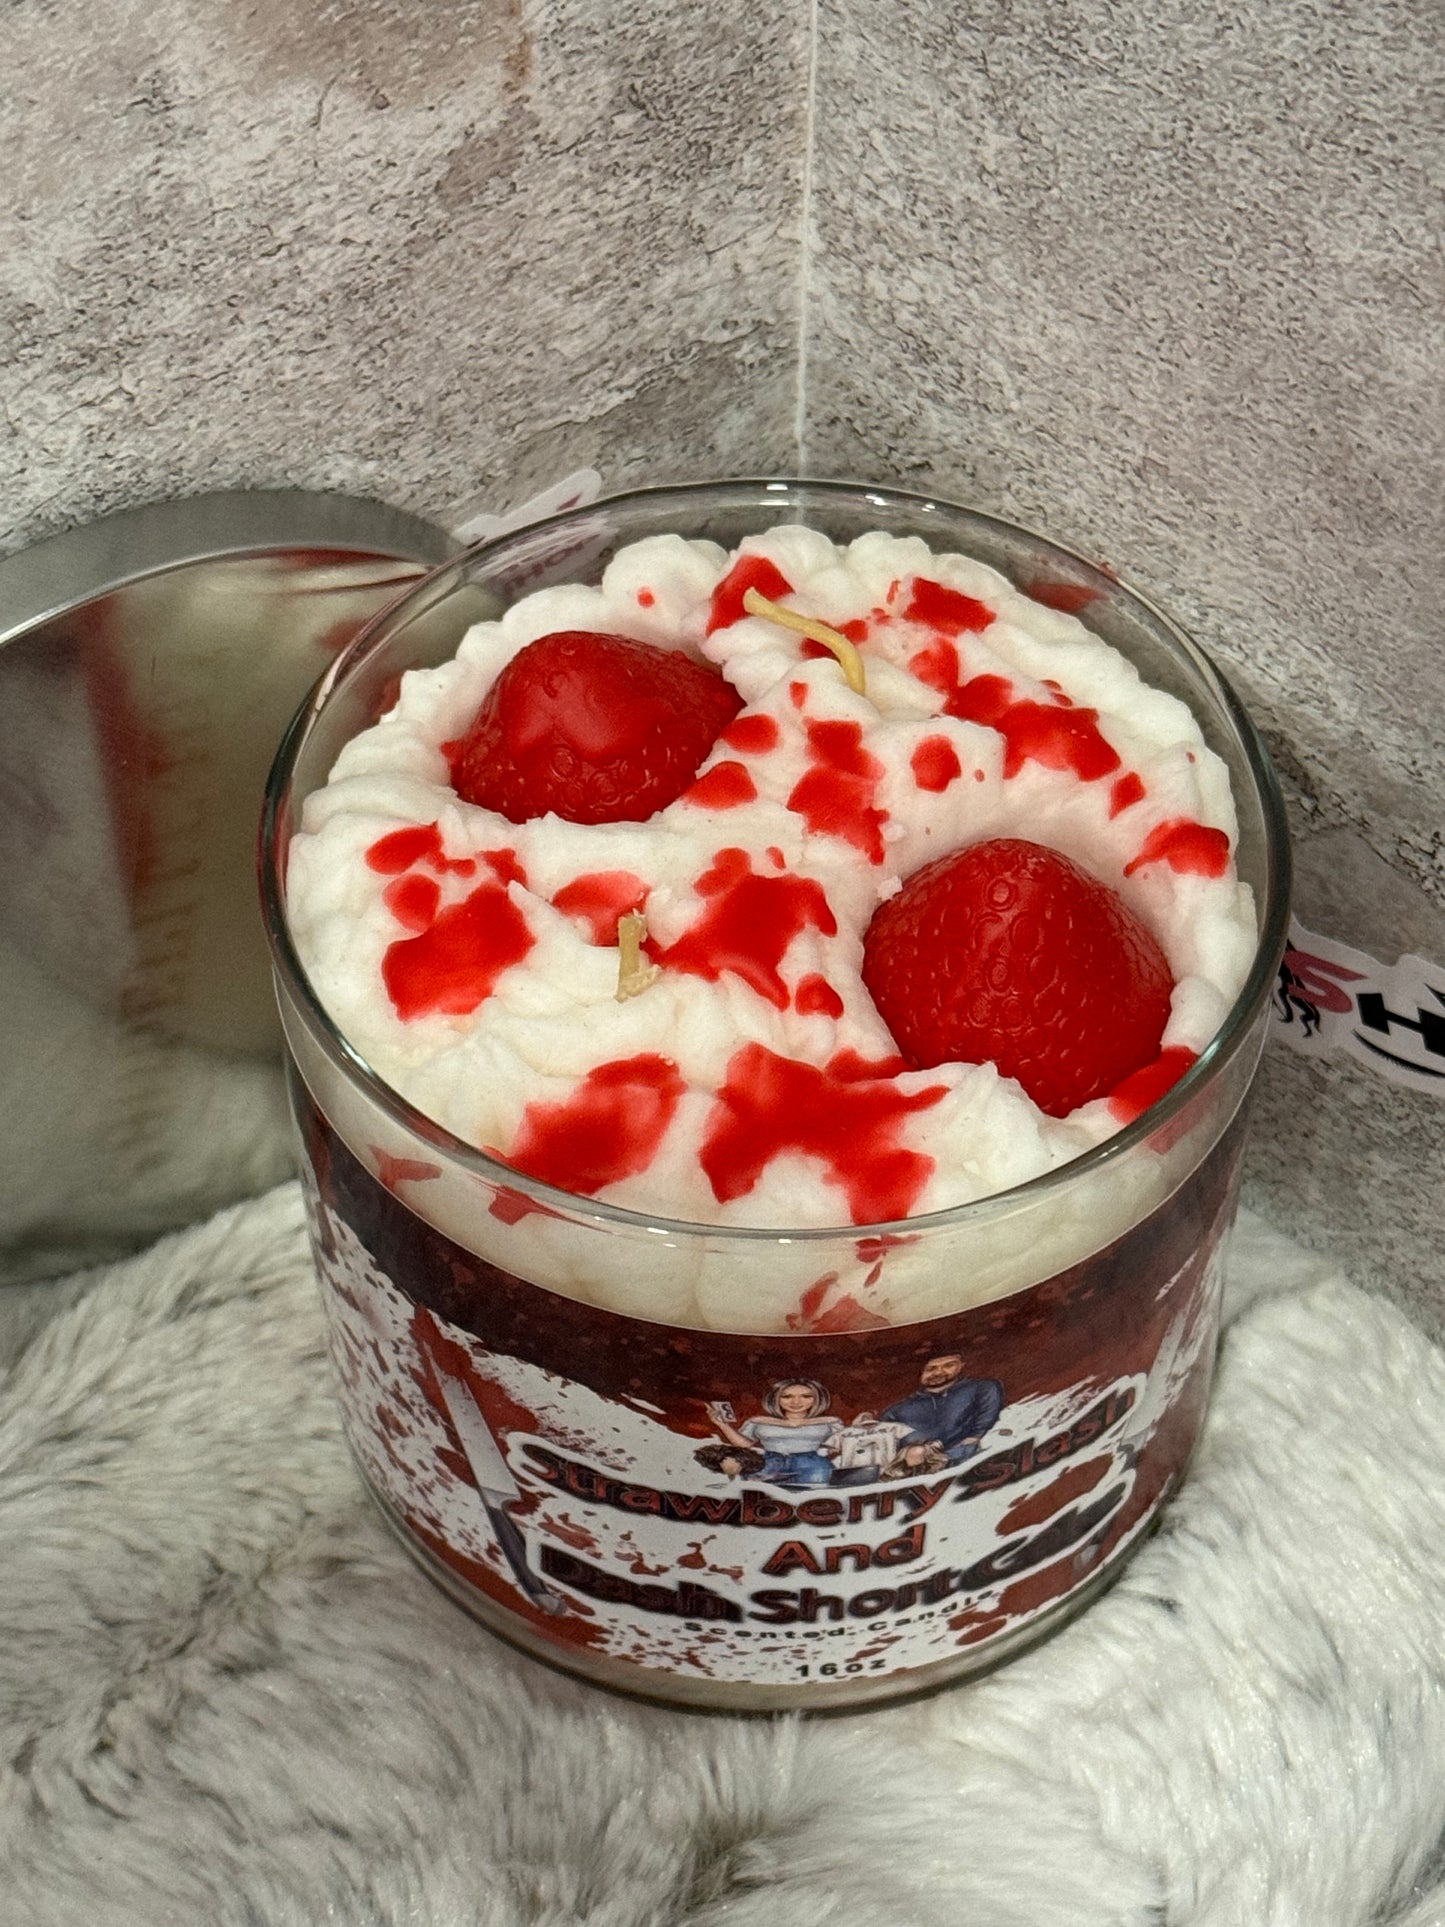 “Strawberry Short Cake” Scented Candle